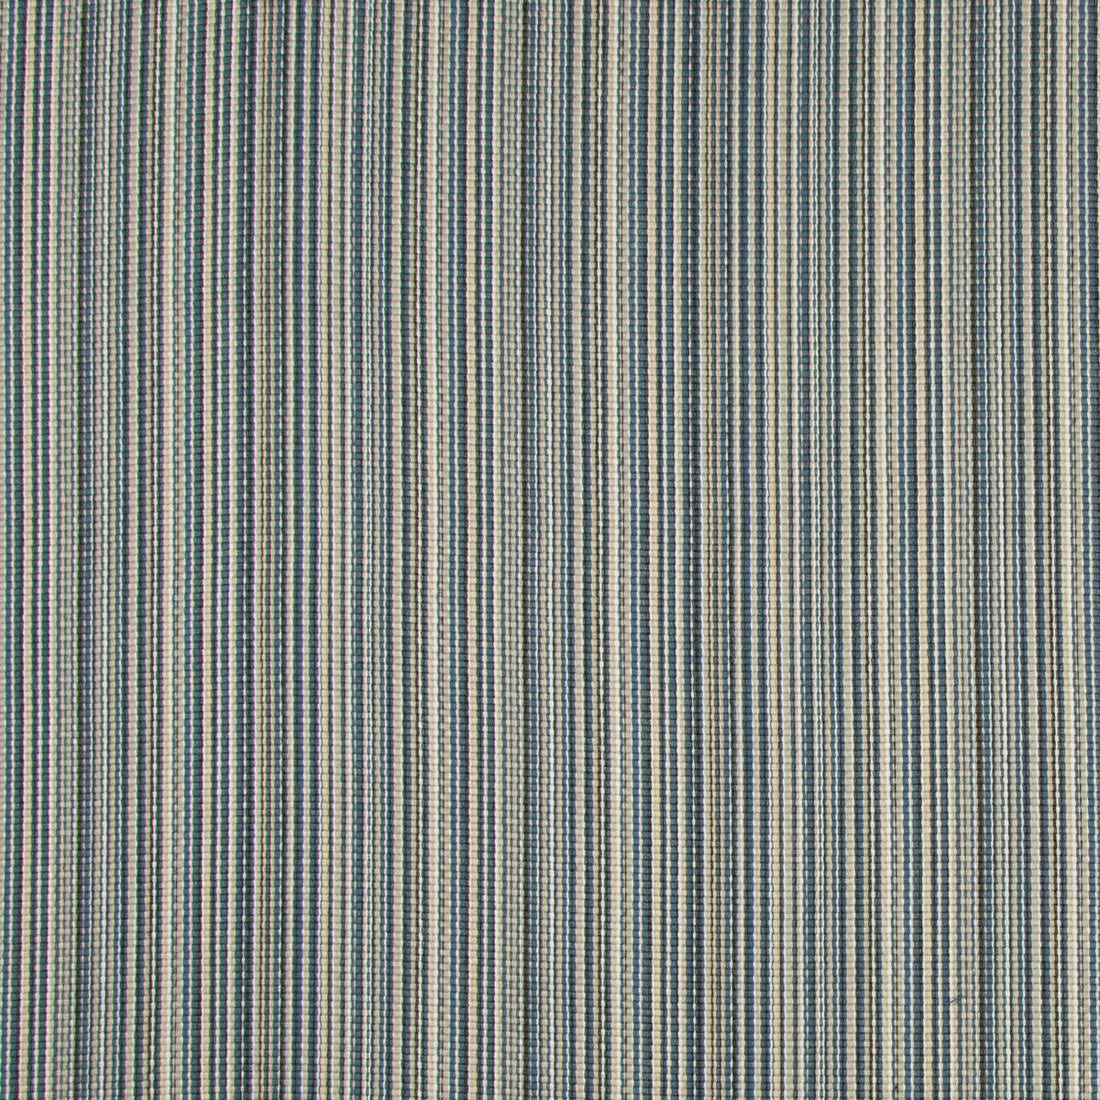 Sailing Stripe fabric in slate color - pattern 31956.516.0 - by Kravet Design in the Oceania Indoor Outdoor collection